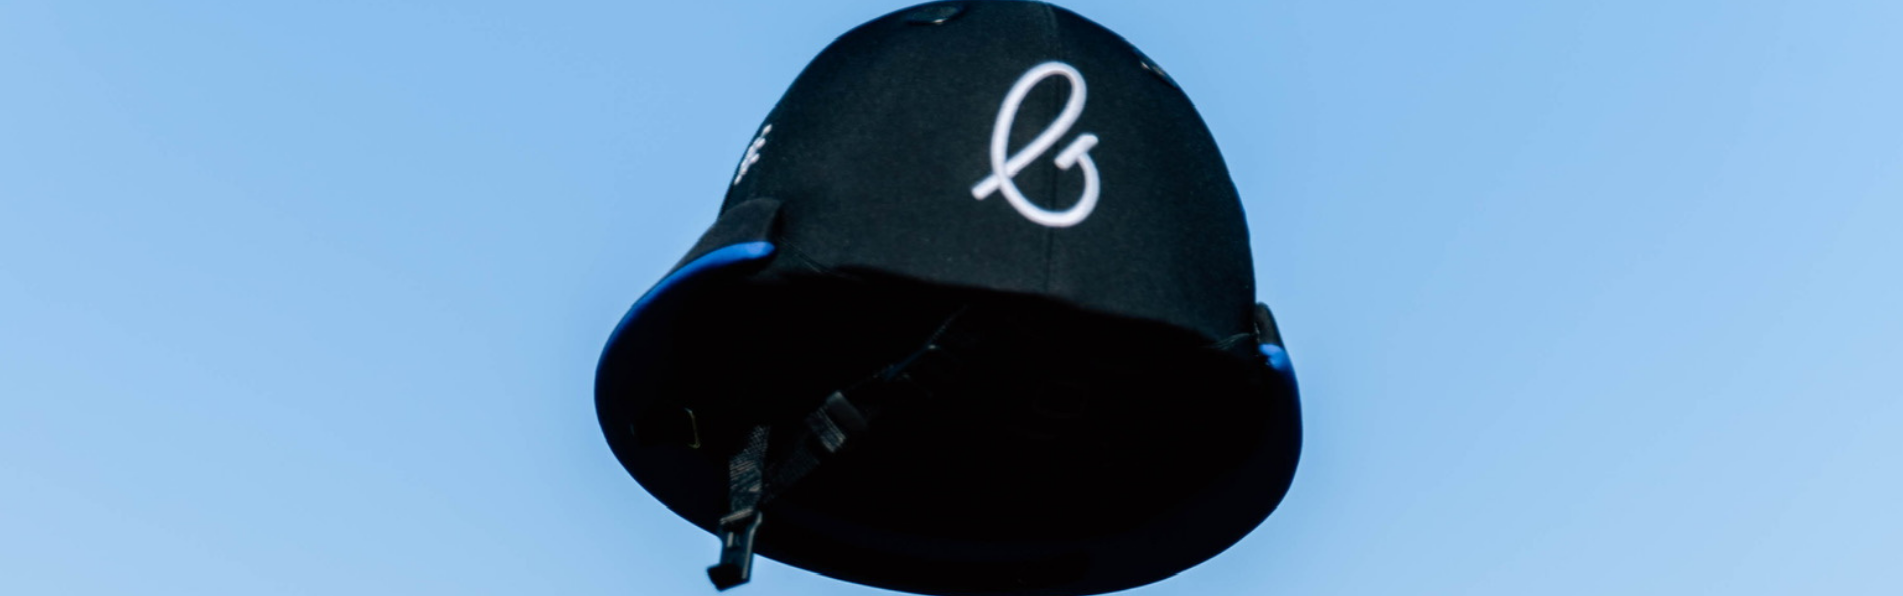 https://www.kronopolo.es/image/cache/catalog/blog/banner%203/Krono-polo-helmets-certified-1903x596.png